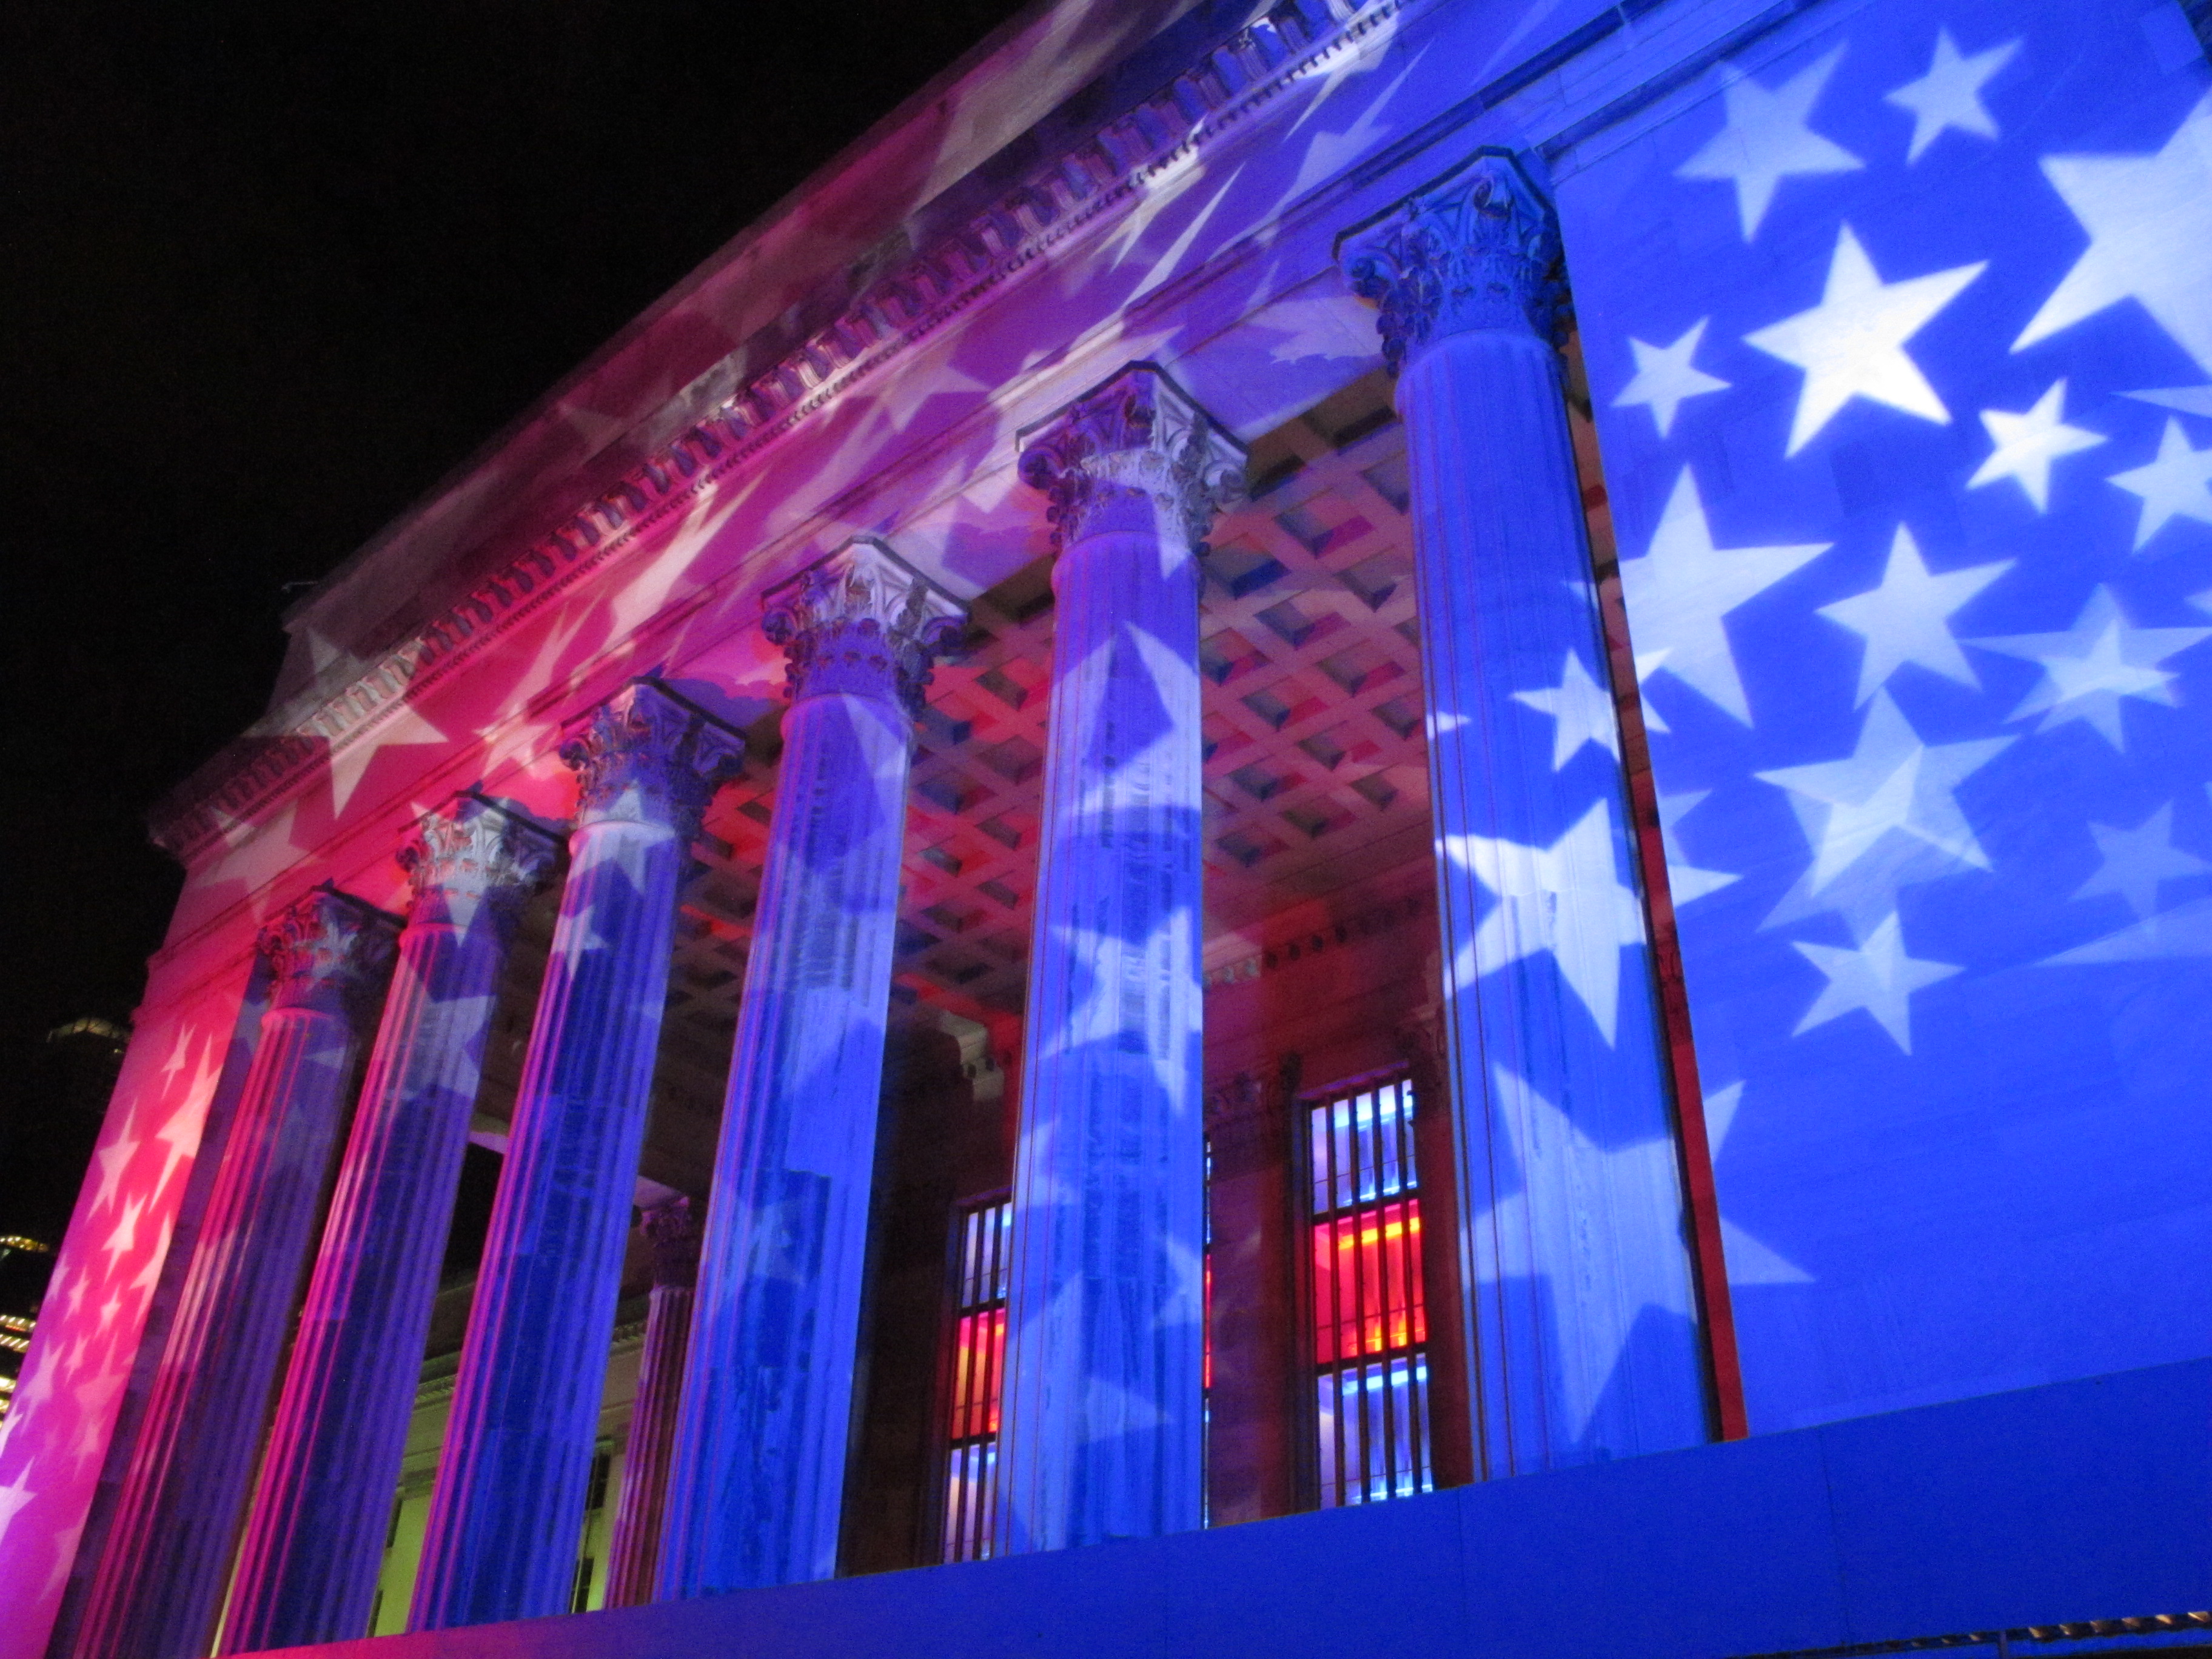 30th Street Station illuminated for DNC with LED